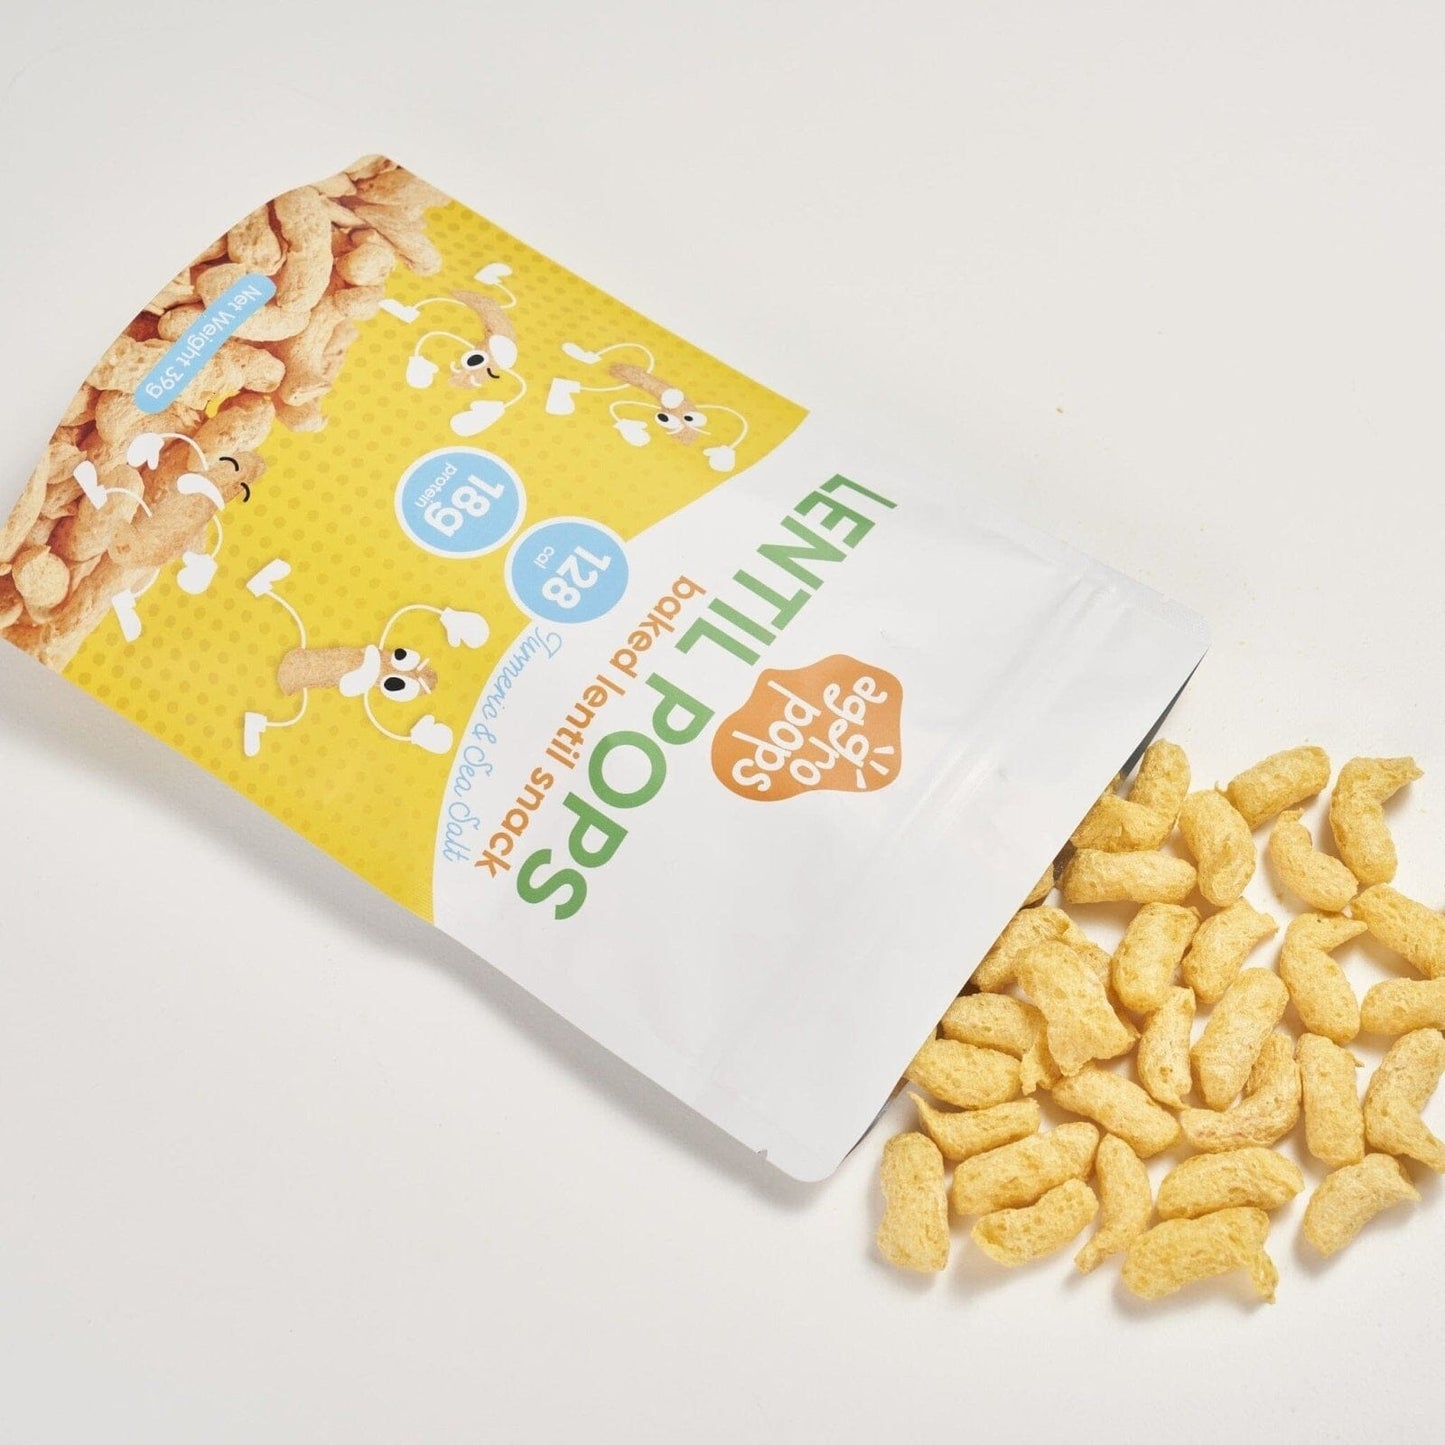 Lentil Pops | 39g | Aggropops - Sustyfoods Singapore meal replacements